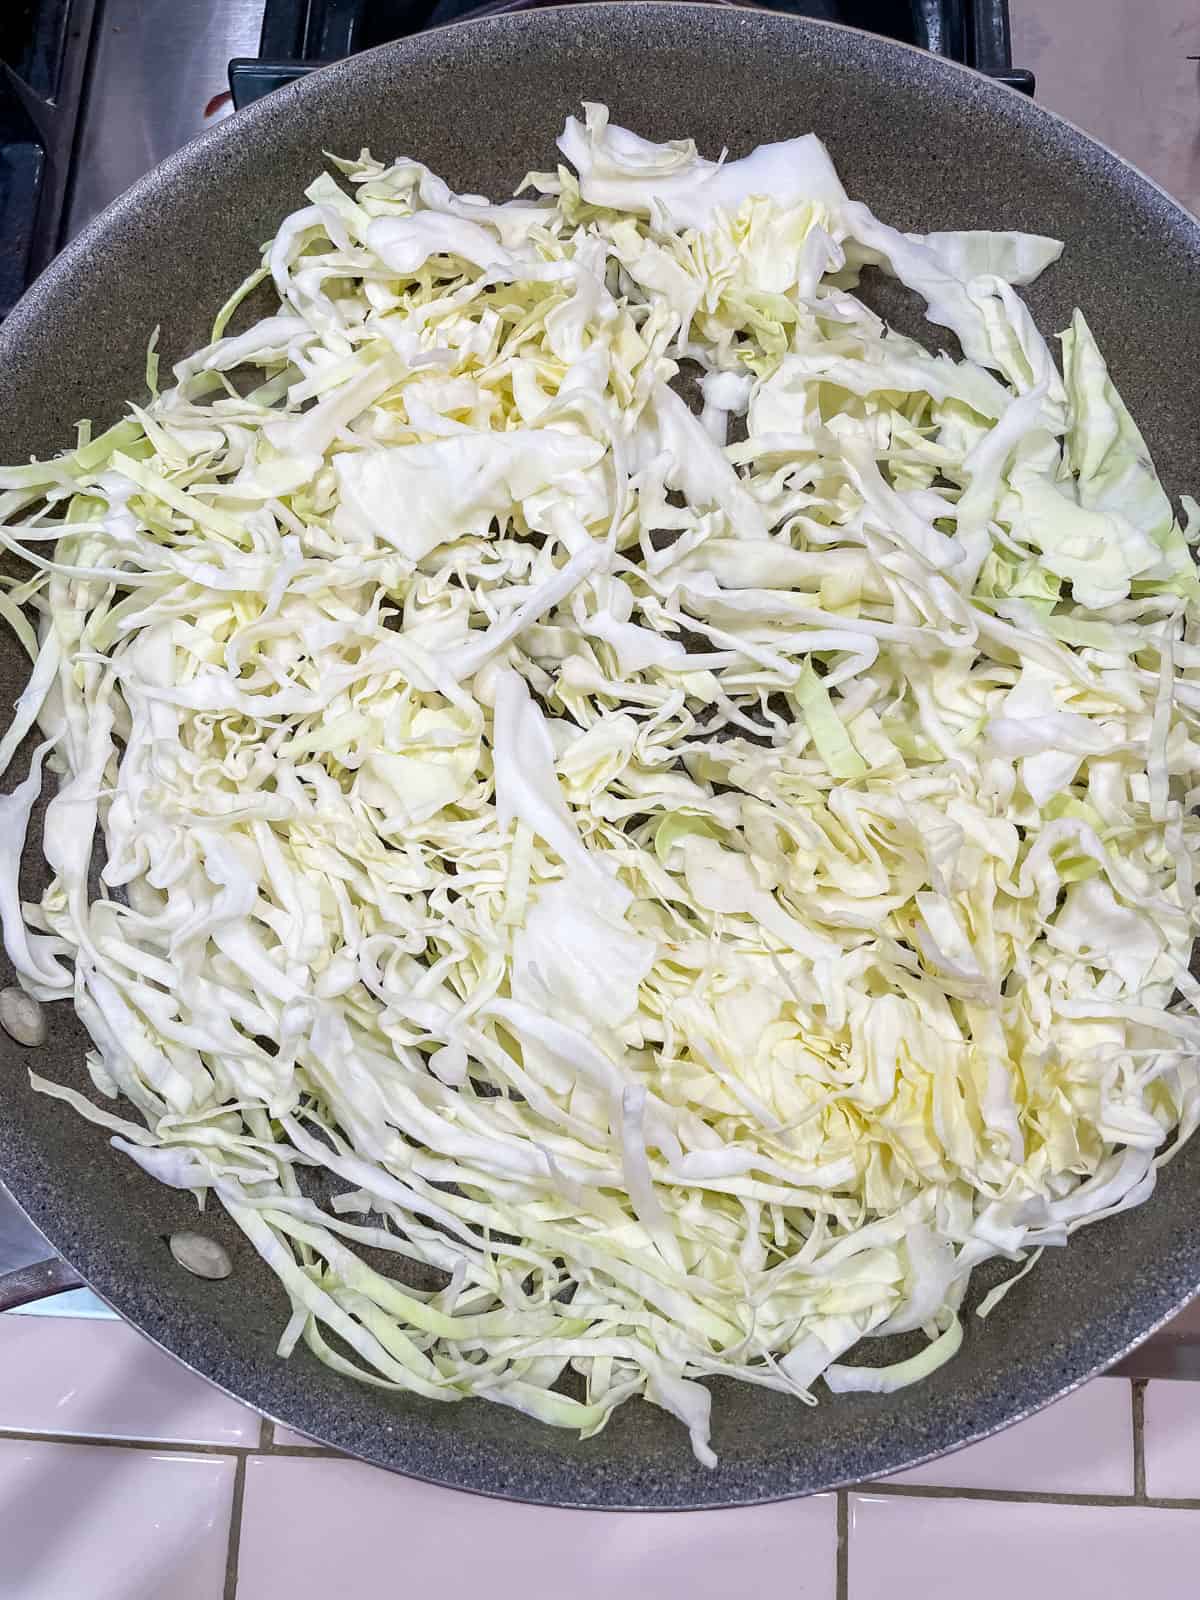 Process Step 1 for Charred Black Pepper Cabbage Strips oil-free - pre-heat skillet over high heat before adding cabbage